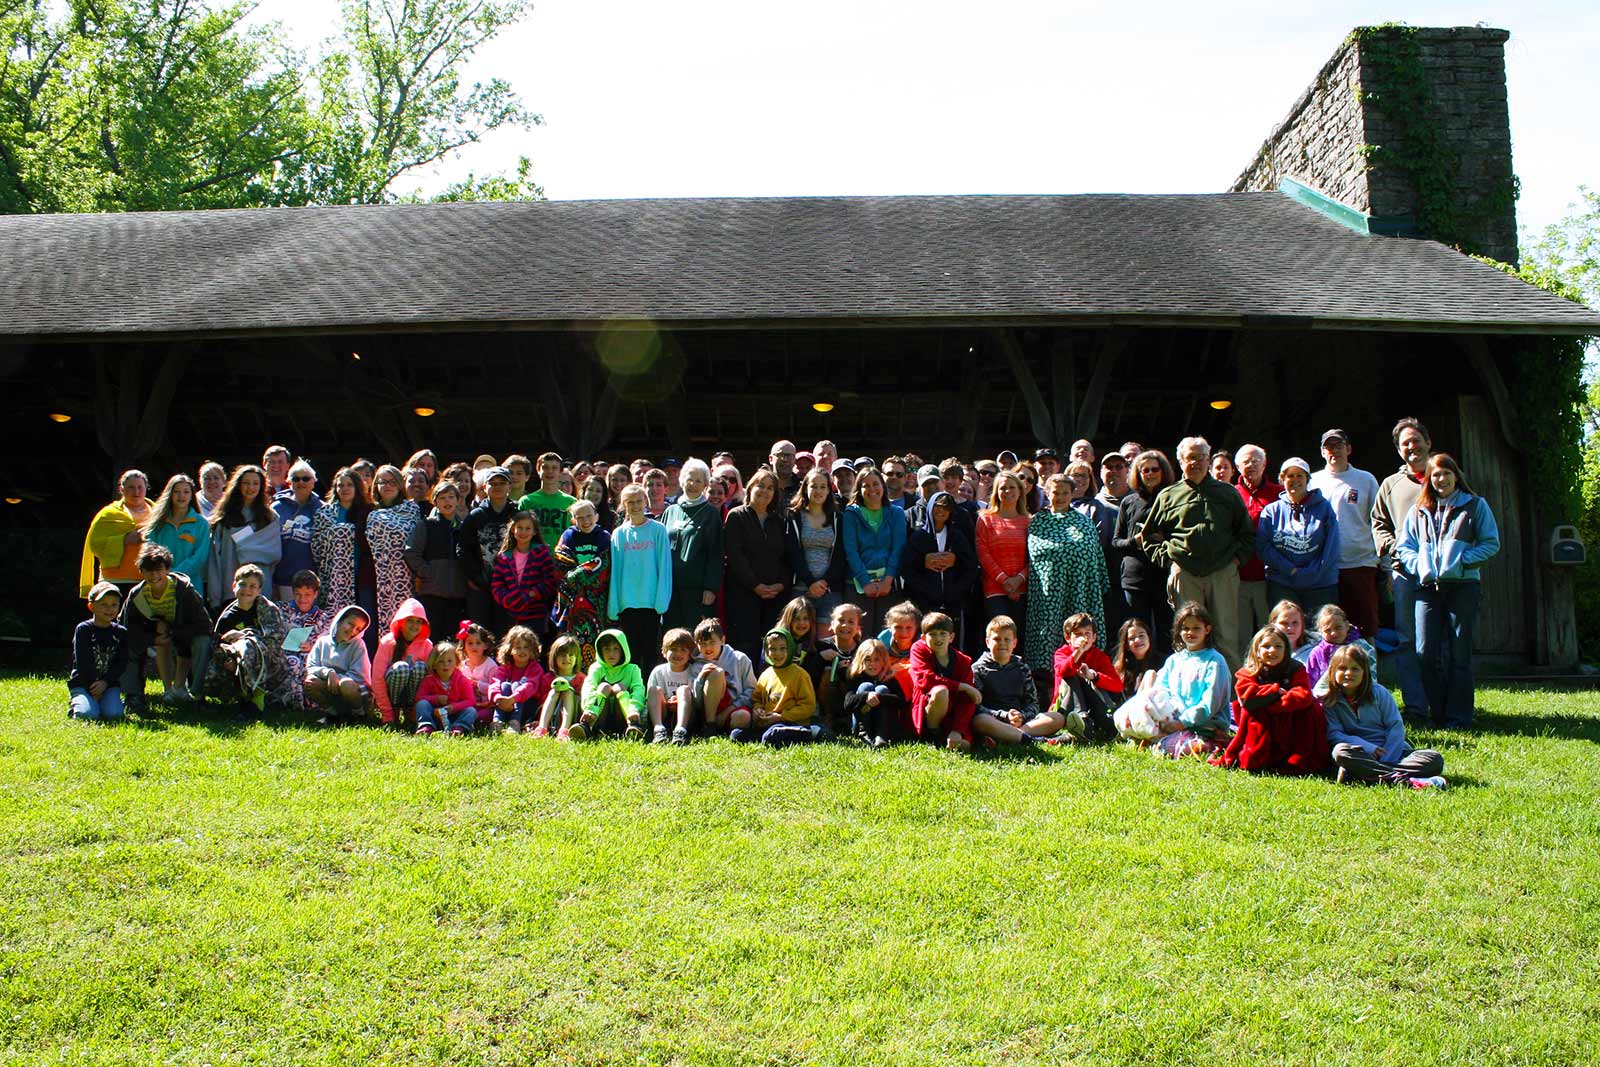 NaCoMe staff and campers